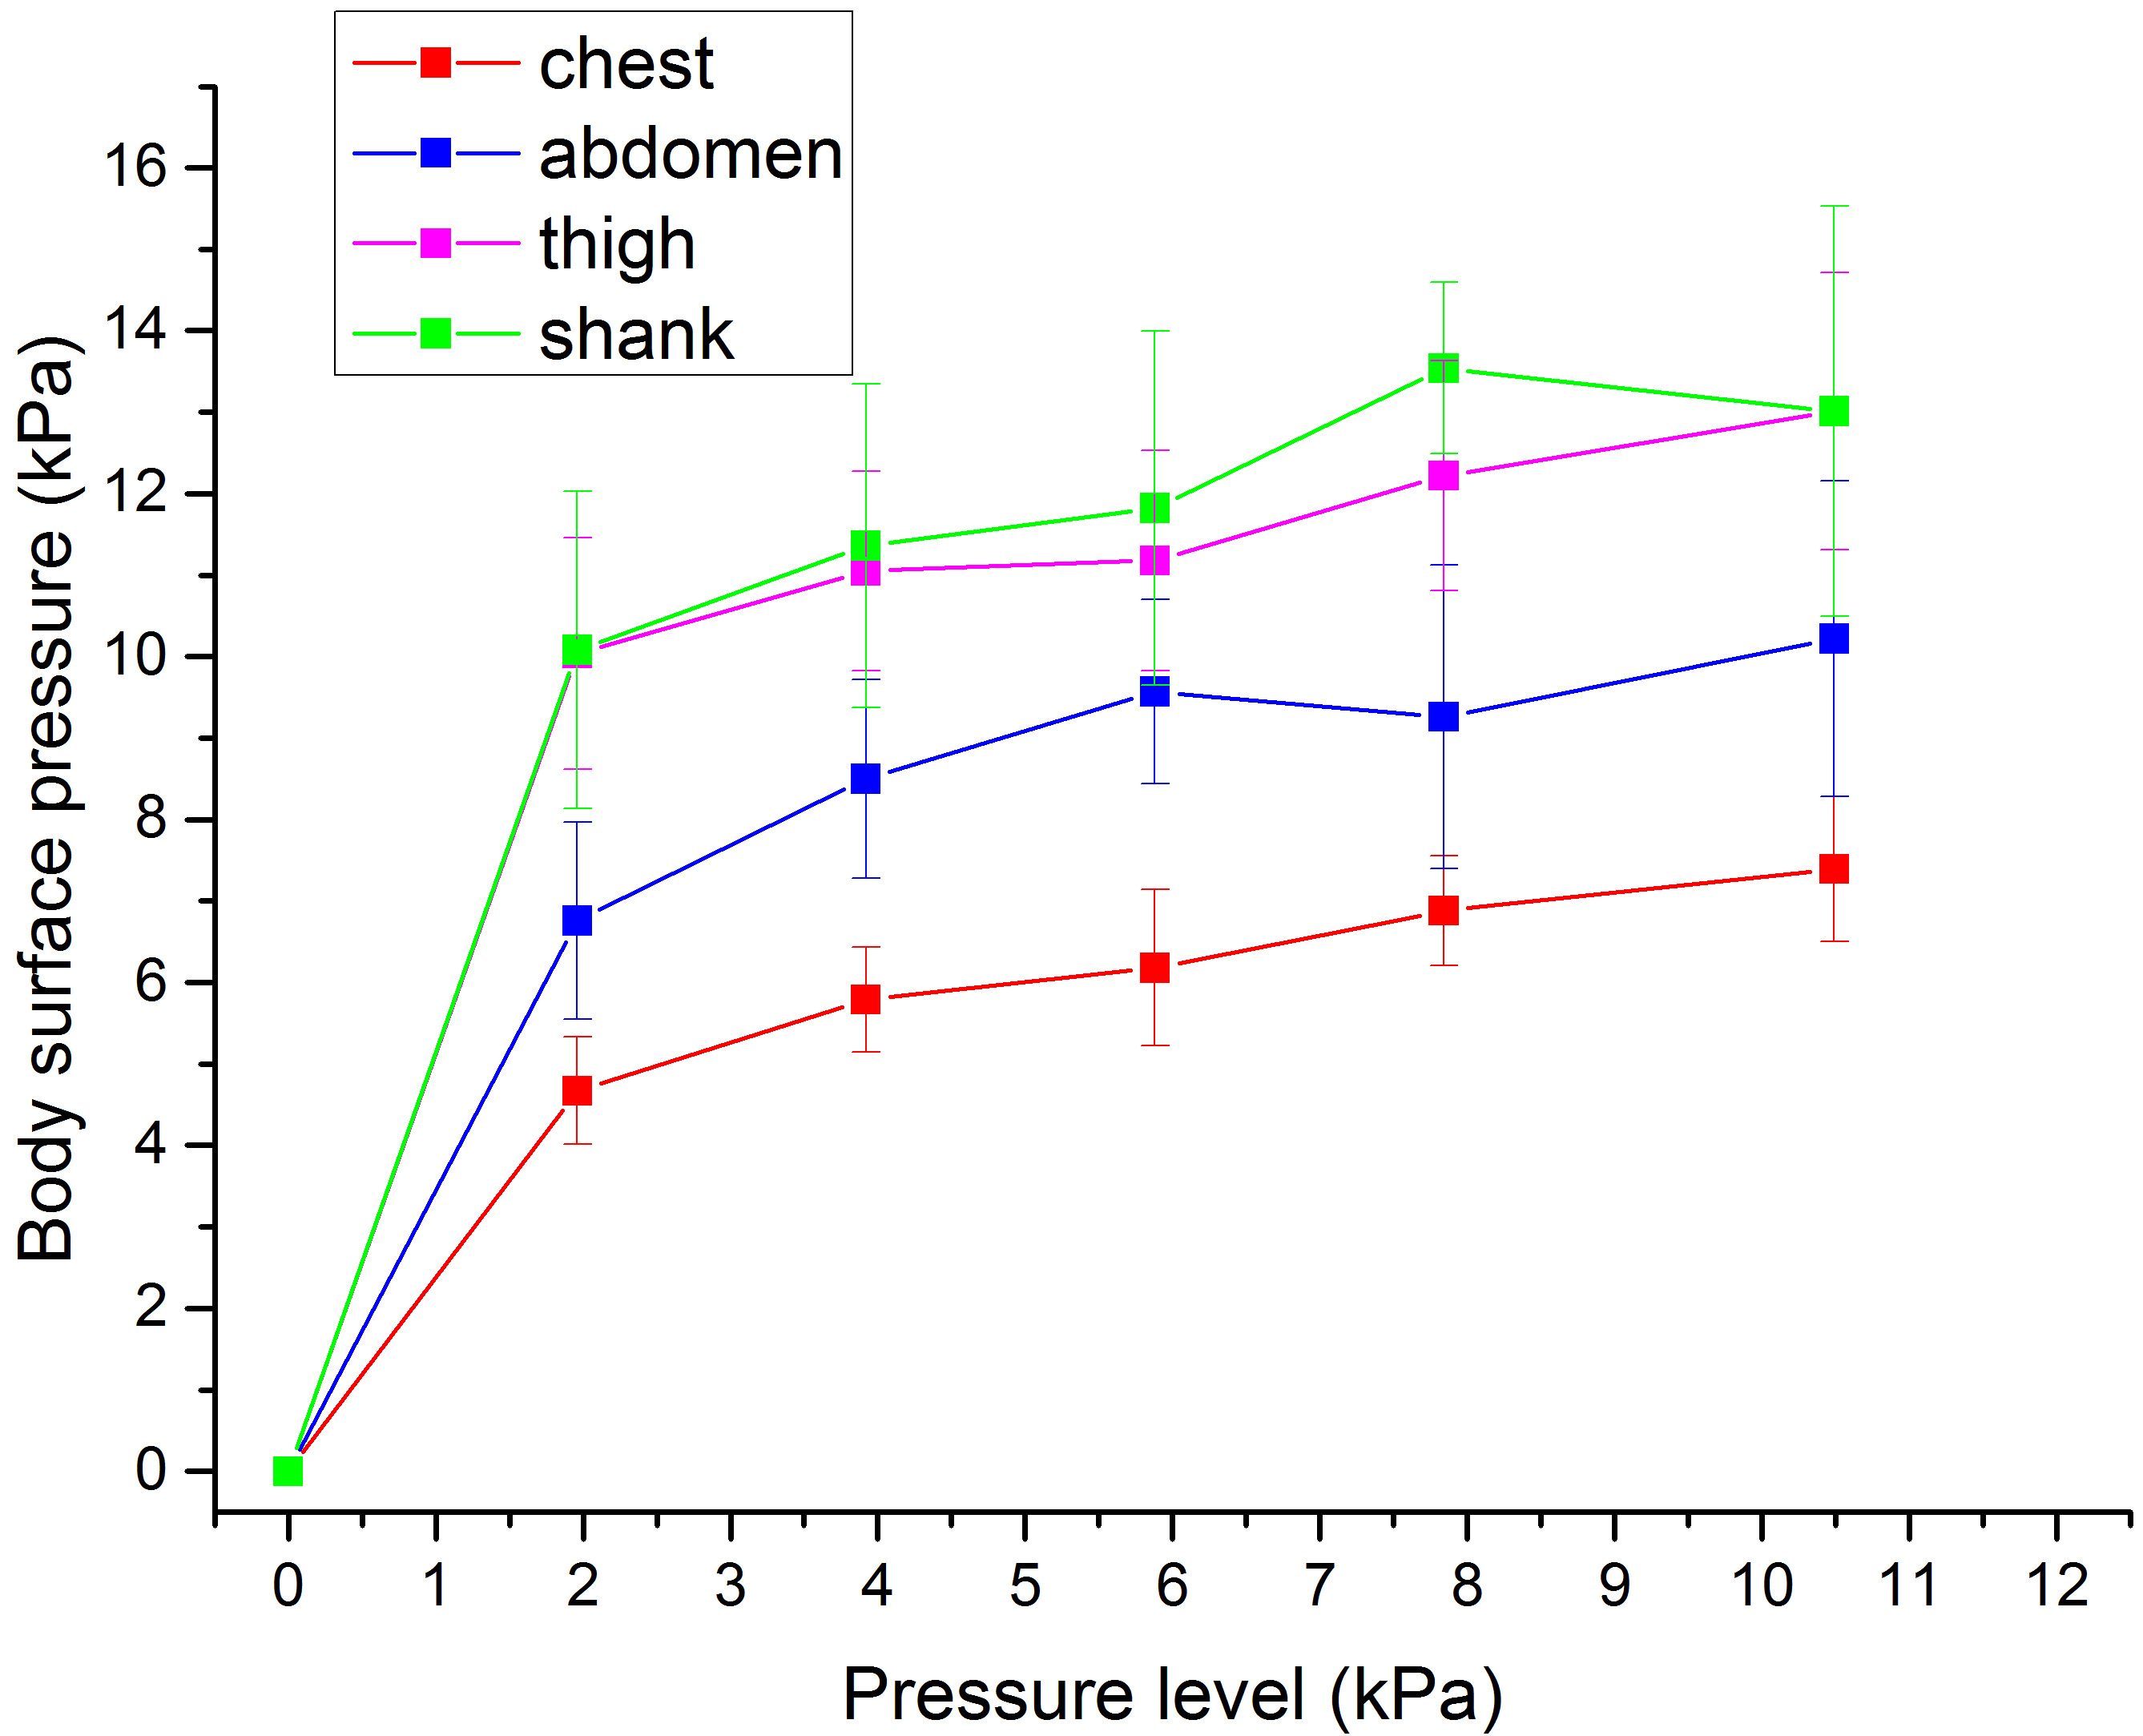 The counter pressure on the body surface at different pressuring levels.